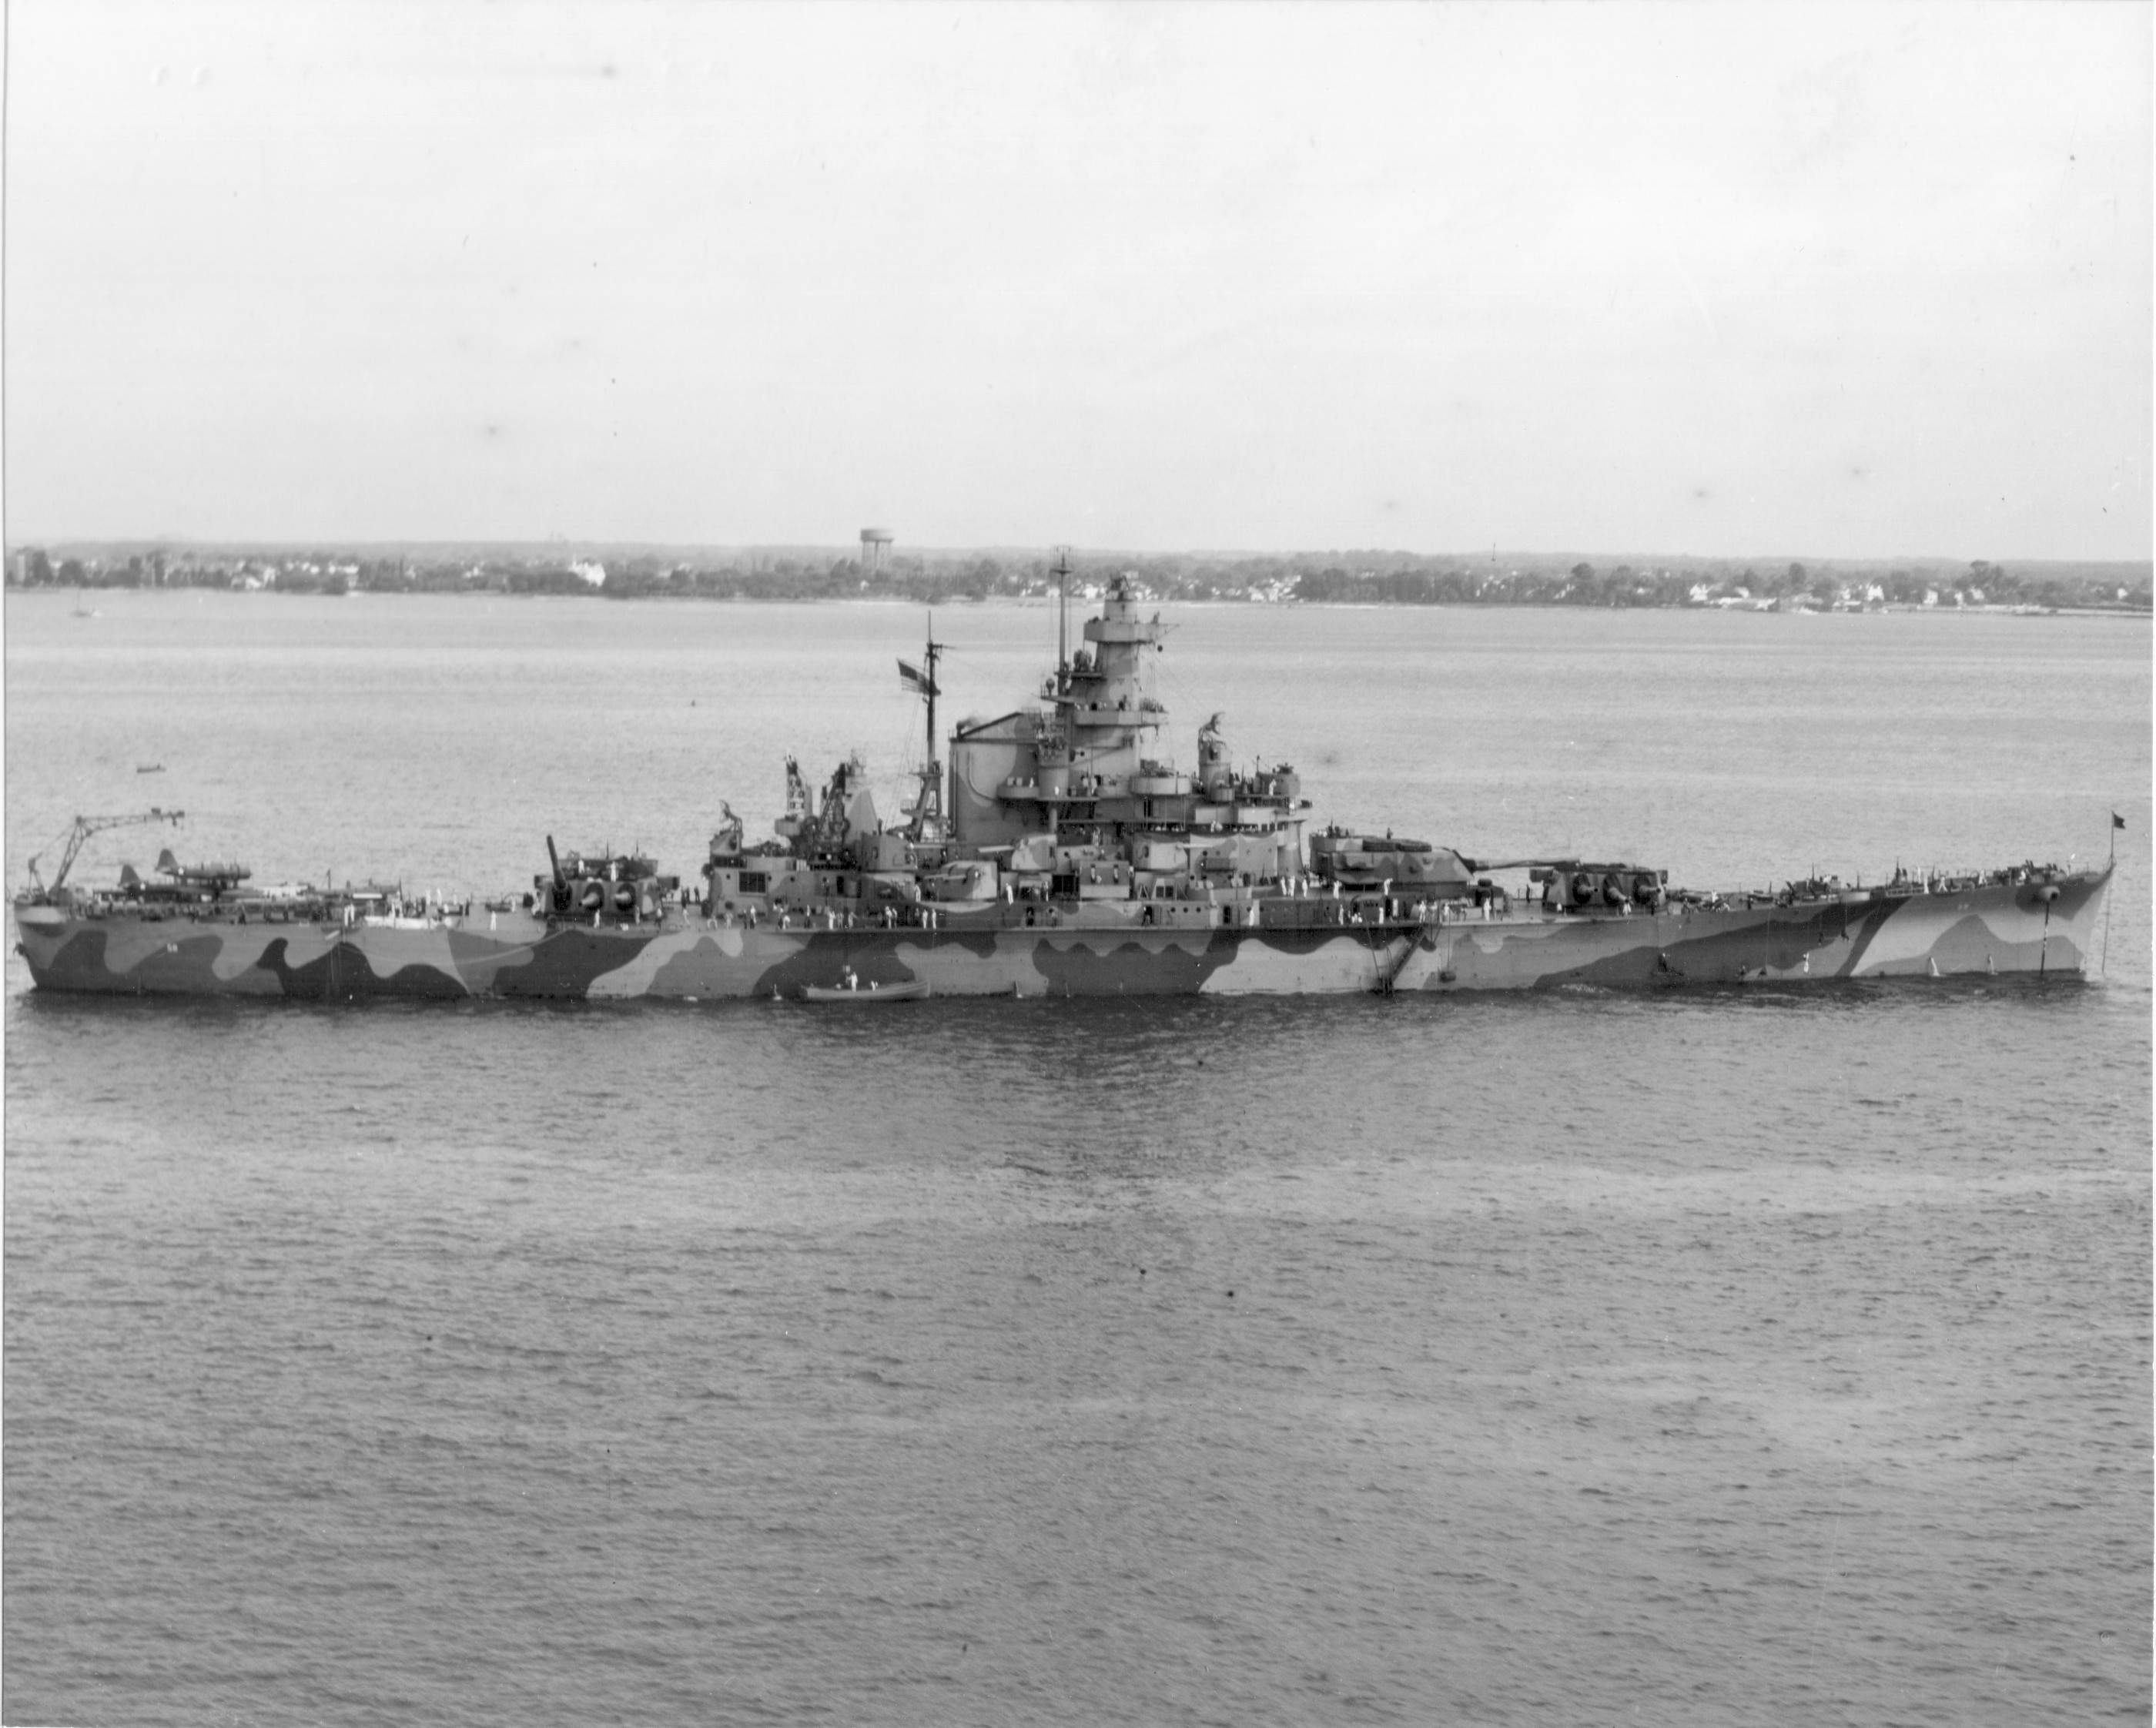 USS Indiana off Norfolk, Virginia, United States, 8 Sep 1942, photo 3 of 5; note OS2U Kingfisher float planes on fantail